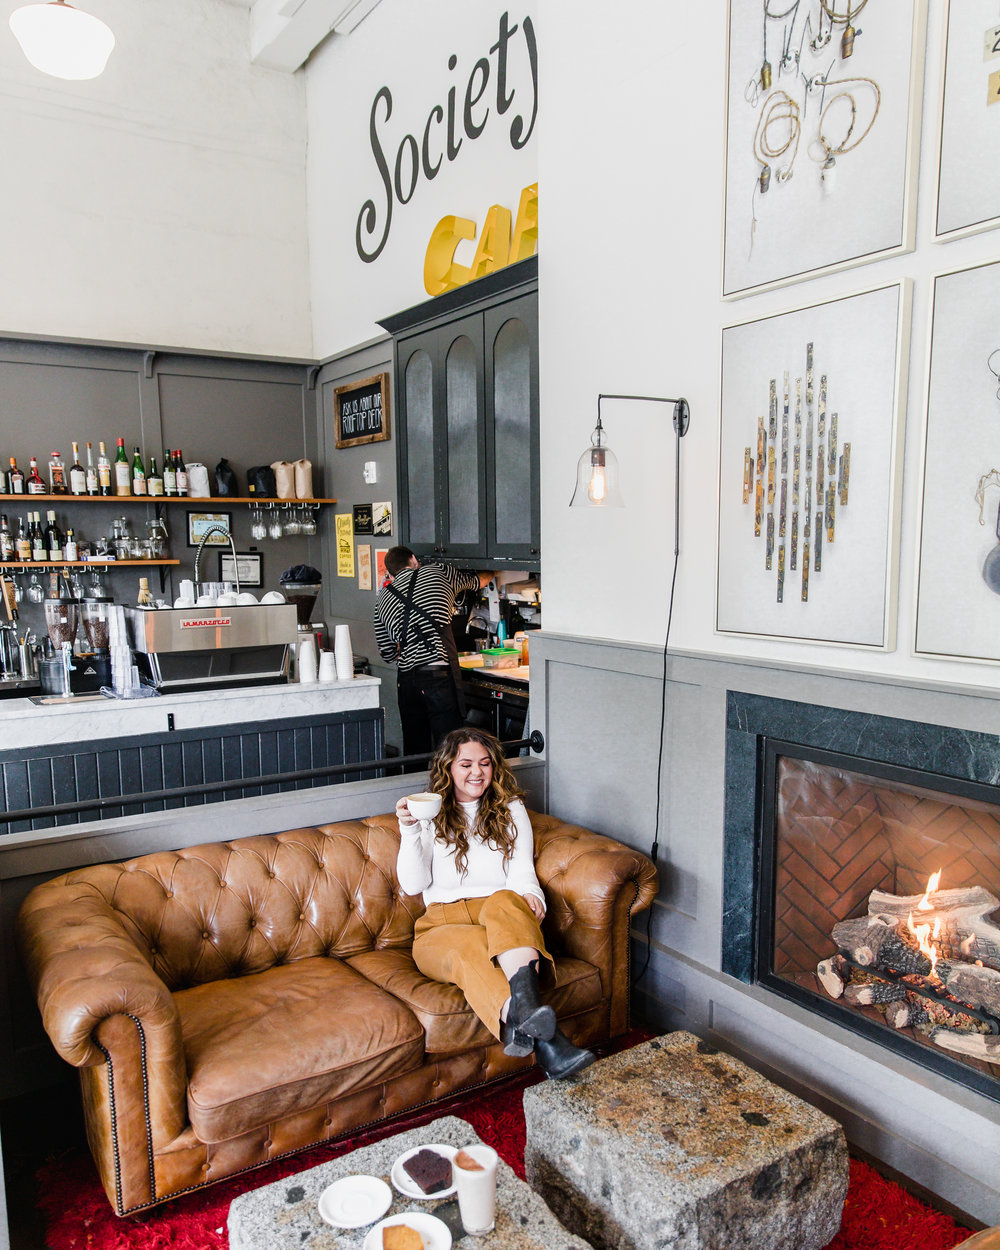 8 Places to Drink Coffee In Portland, OR by Foodie Snitch